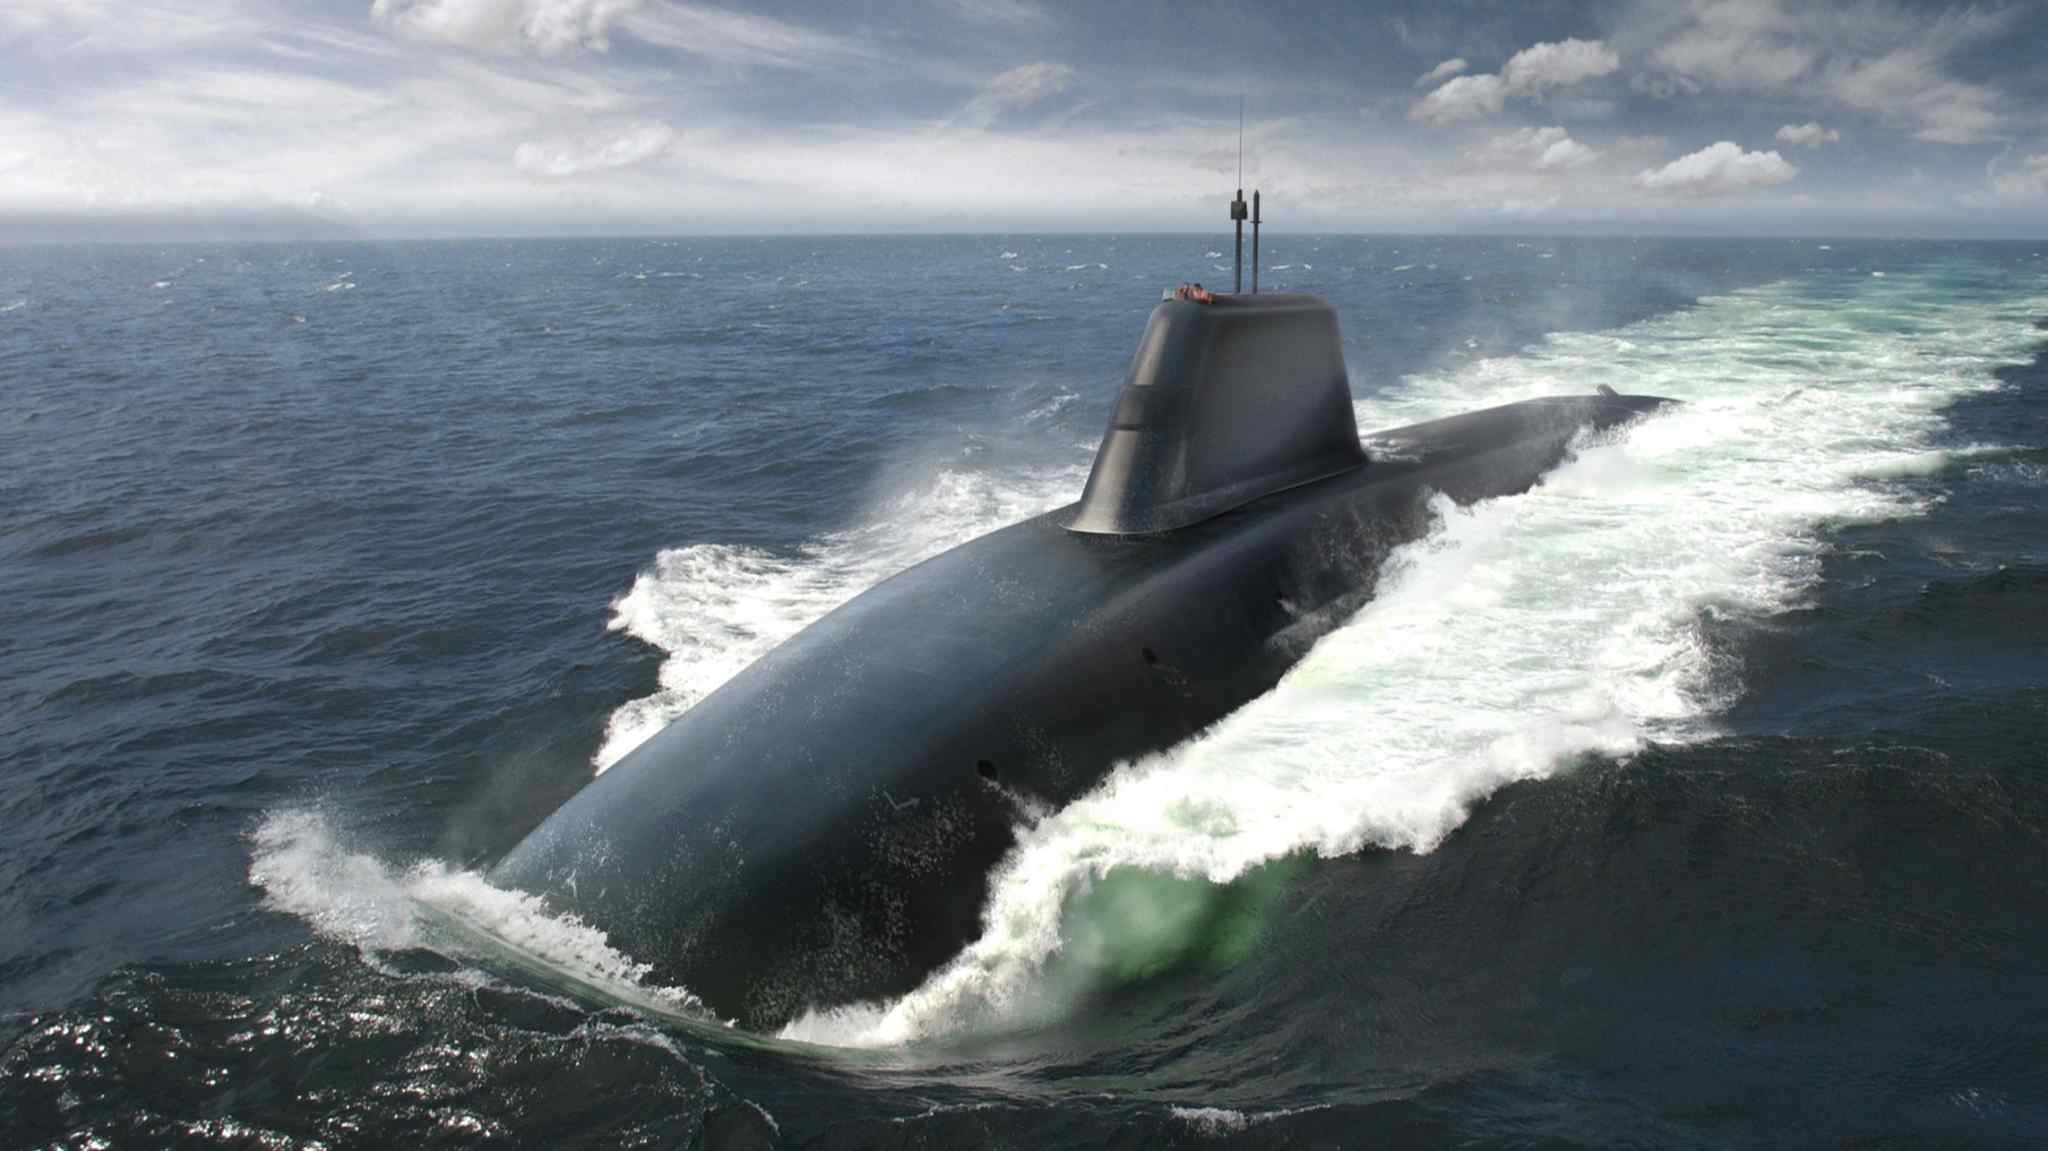 BAE Systems wins £3.95bn contract for Aukus nuclear submarines